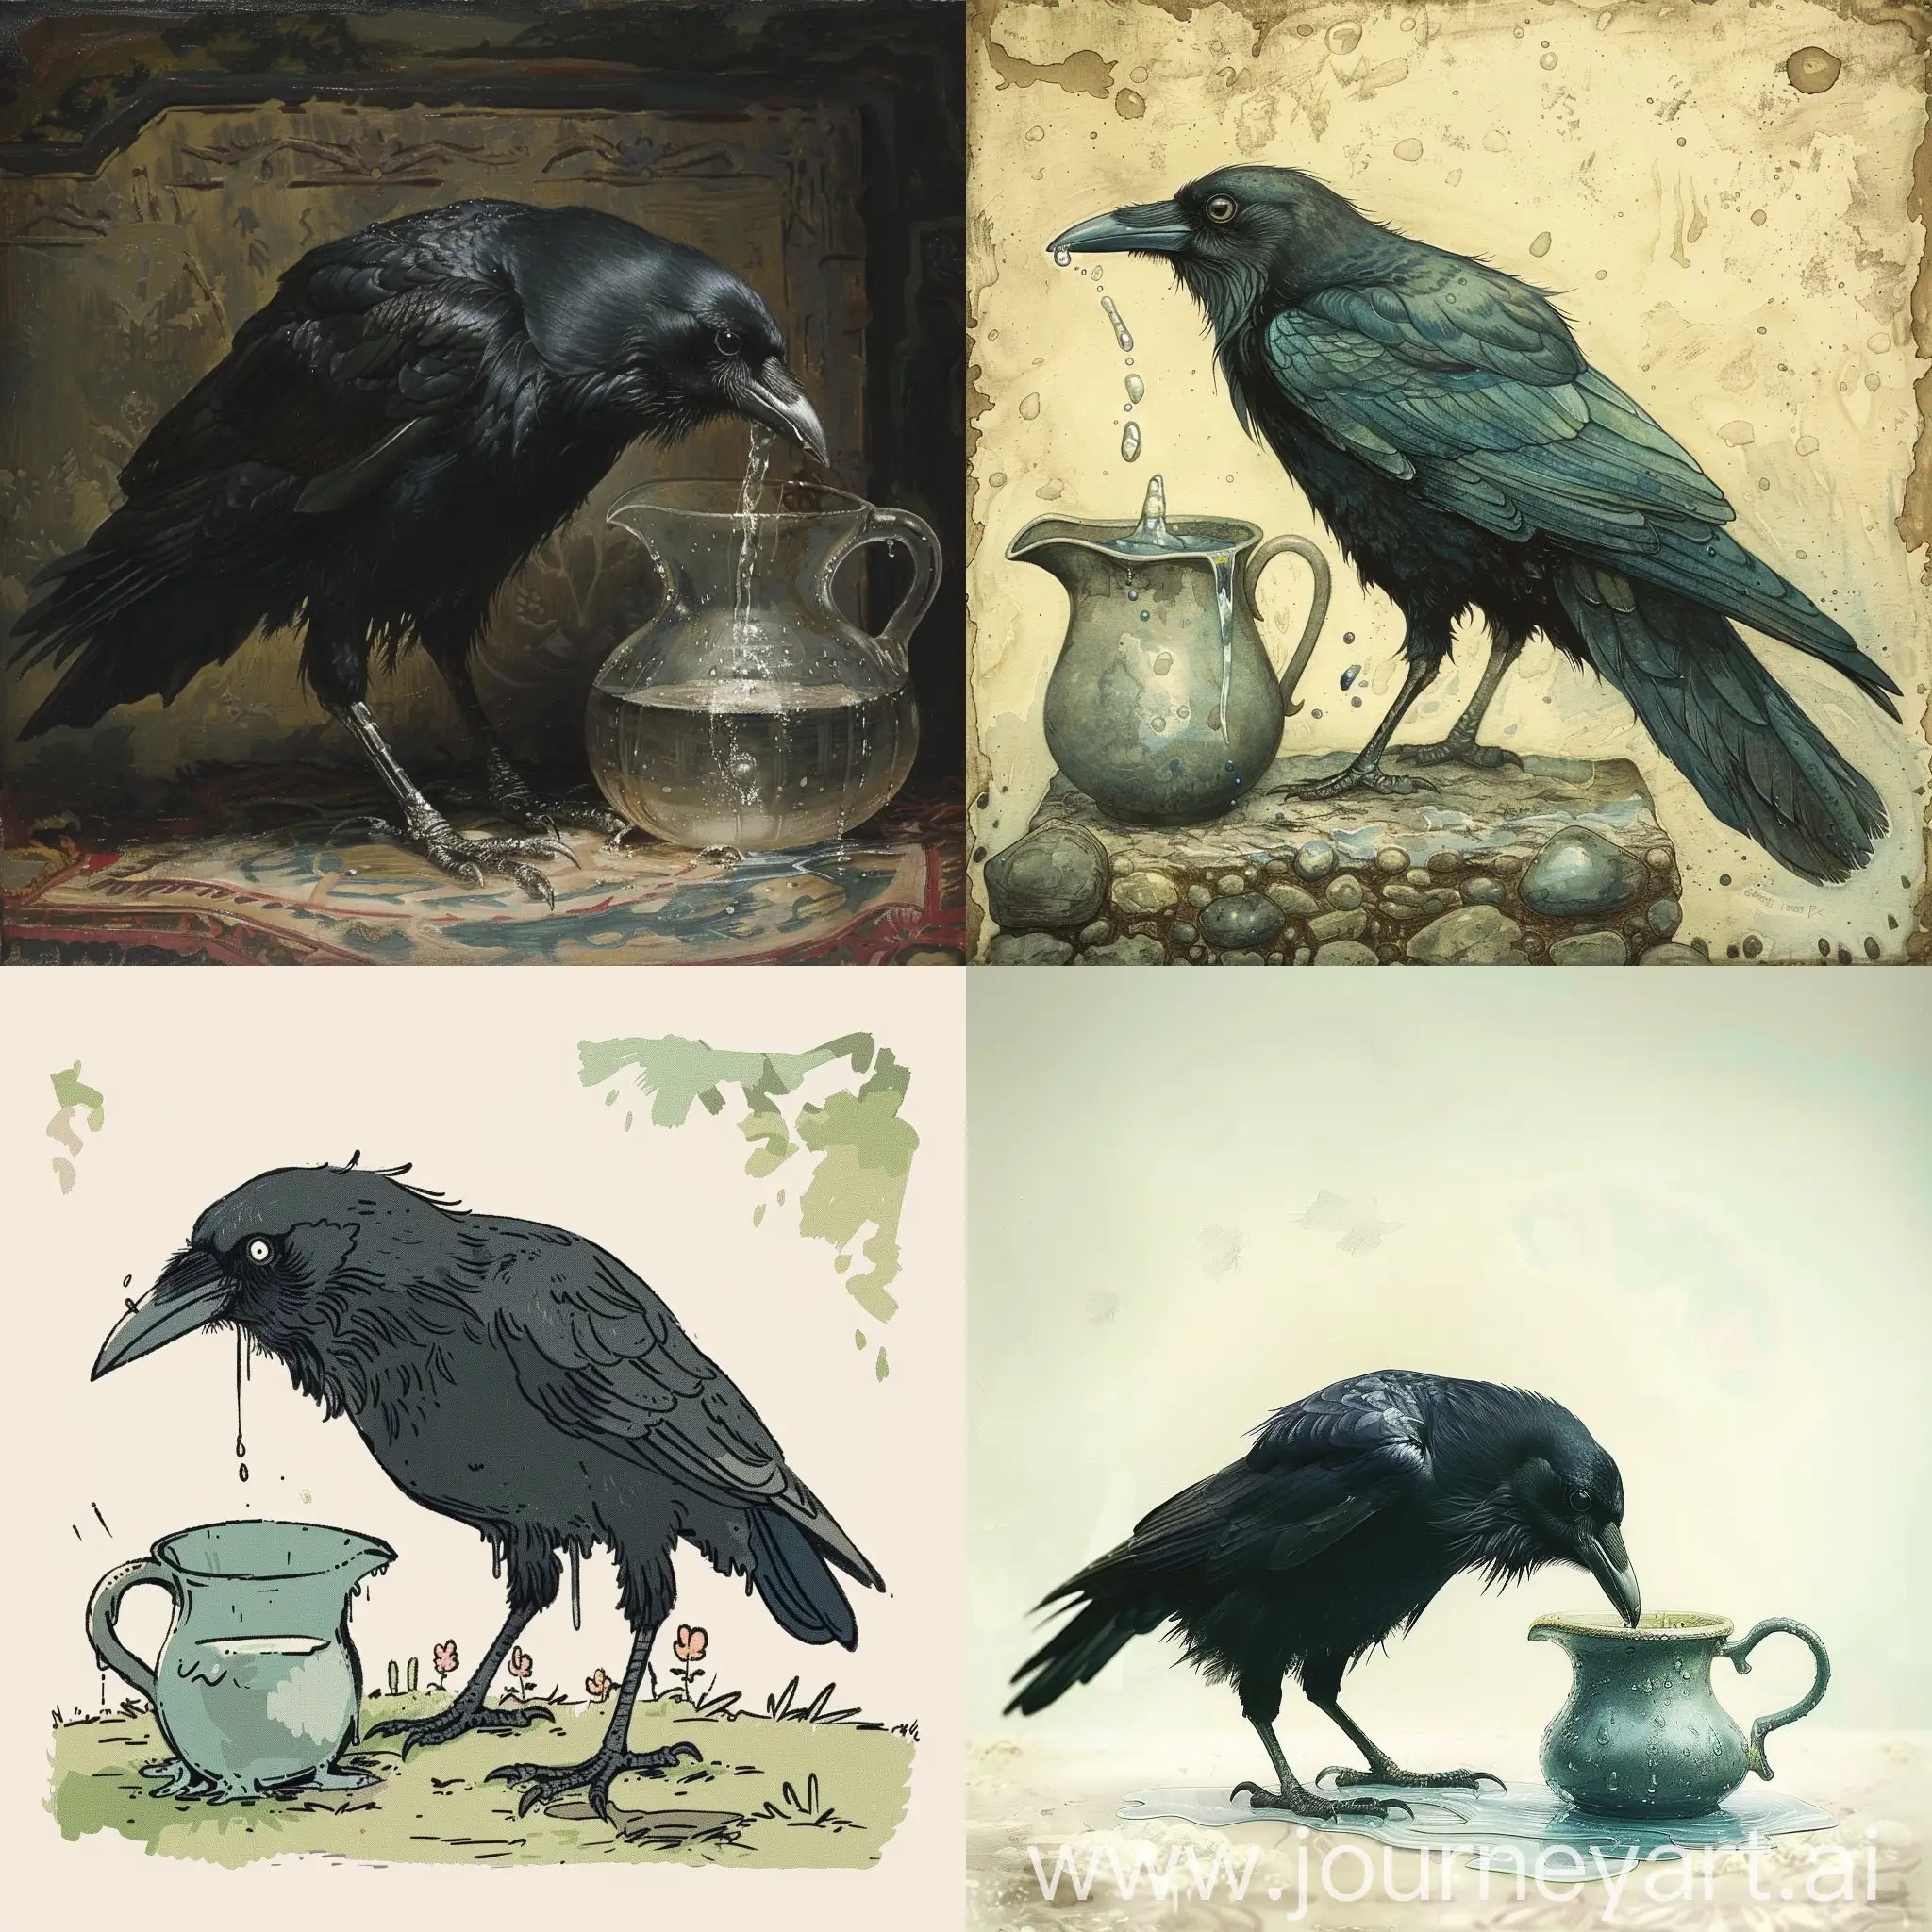 a thirsty Crow found a pitcher with a little water in it.